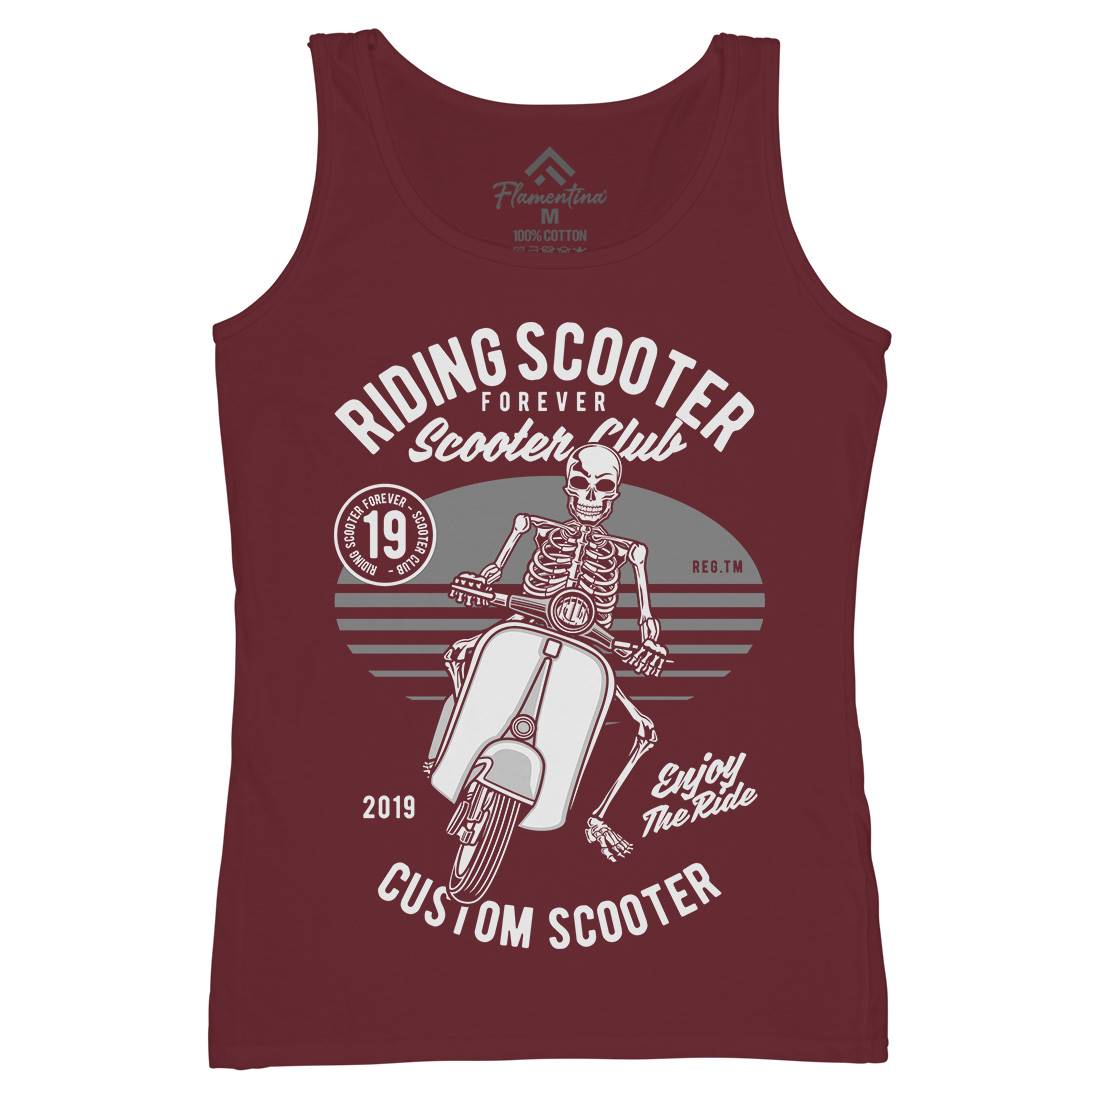 Riding Scooter Womens Organic Tank Top Vest Motorcycles D570